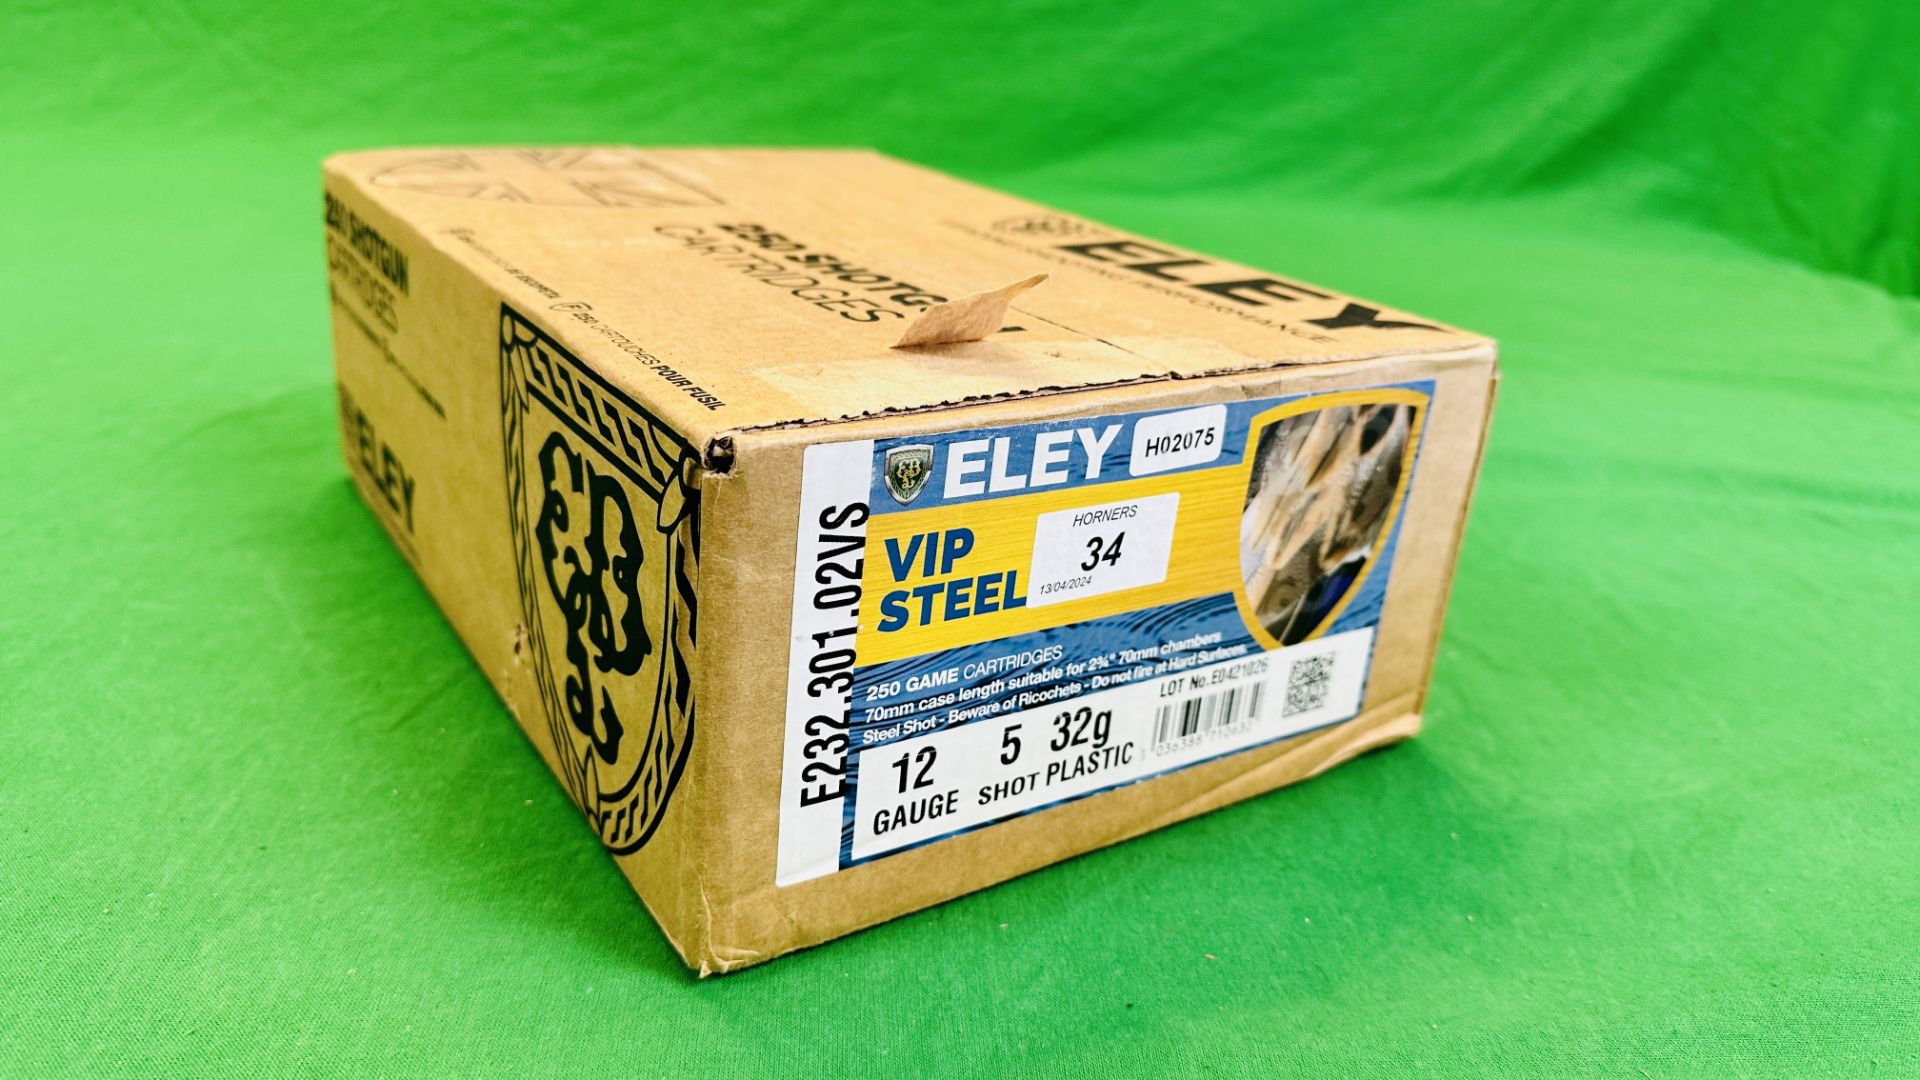 250 X ELEY VIP STEEL 12 GAUGE 32G 5 SHOT PLASTIC WAD CARTRIDGES - (TO BE COLLECTED IN PERSON BY